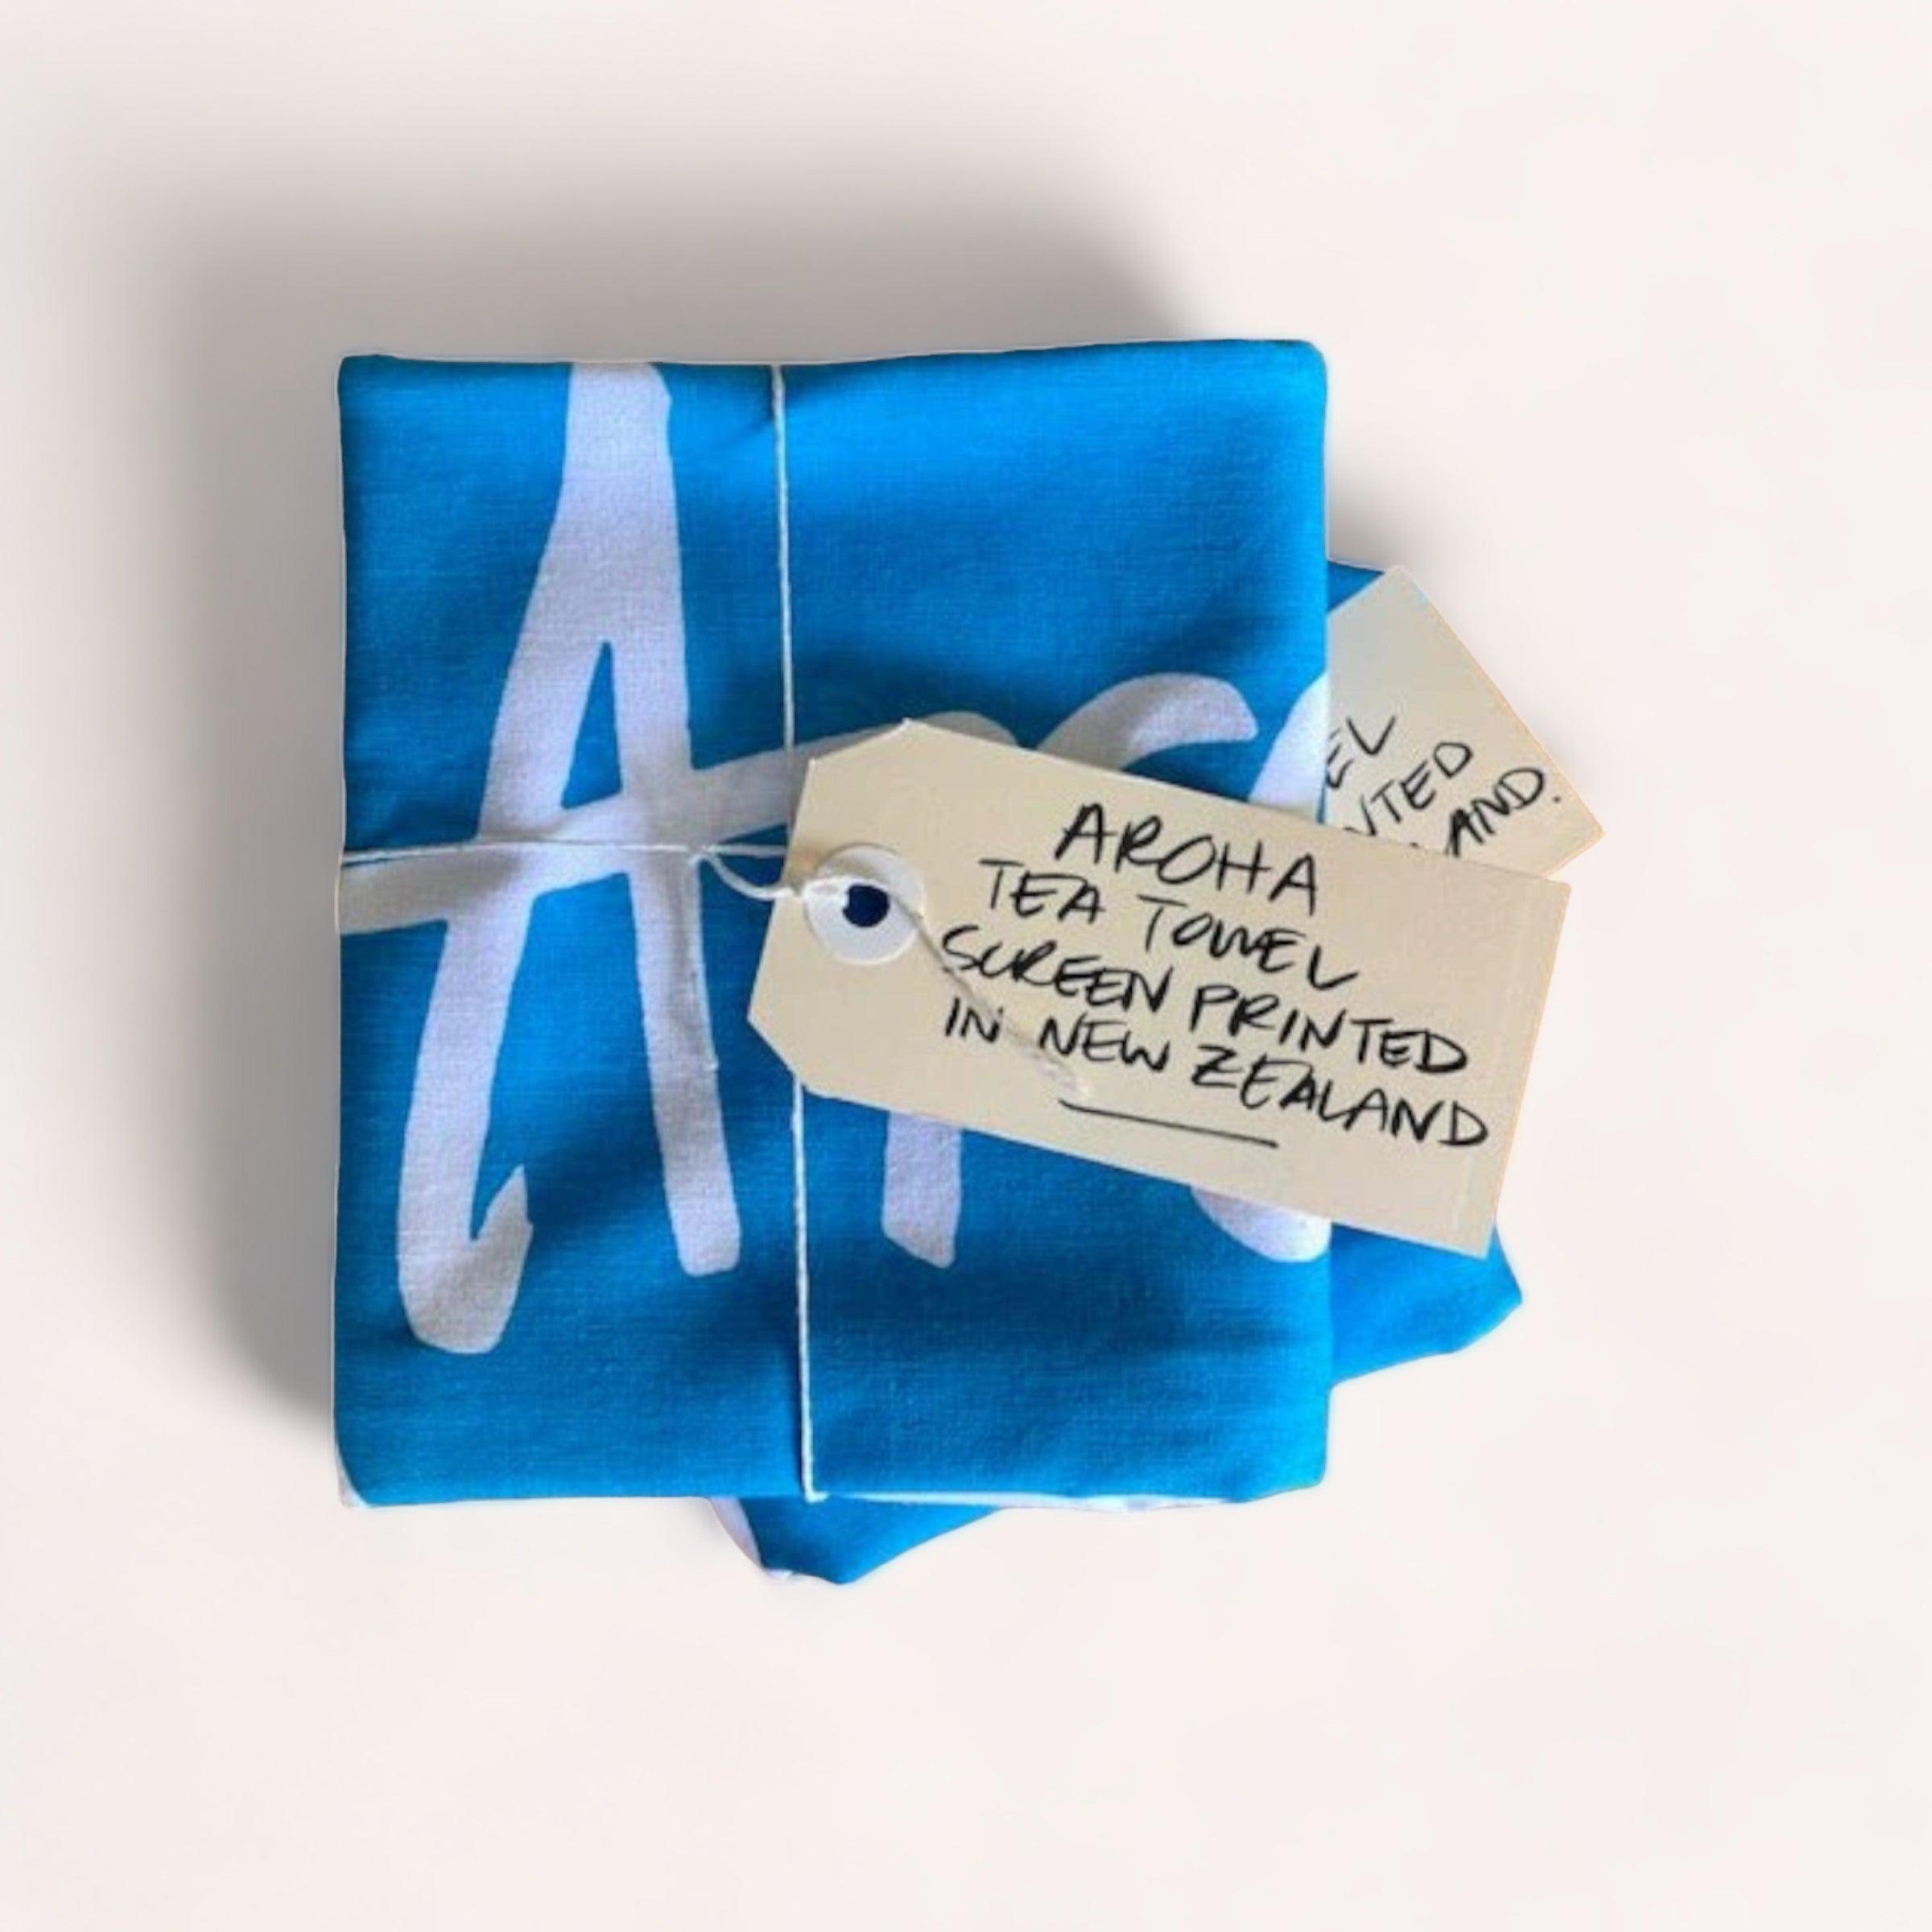 Folded blue fabric with white ‘a’ print and a tag indicating it is a 100% cotton, screenprinted Aroha Tea Towel from Tuesday Print in New Zealand.